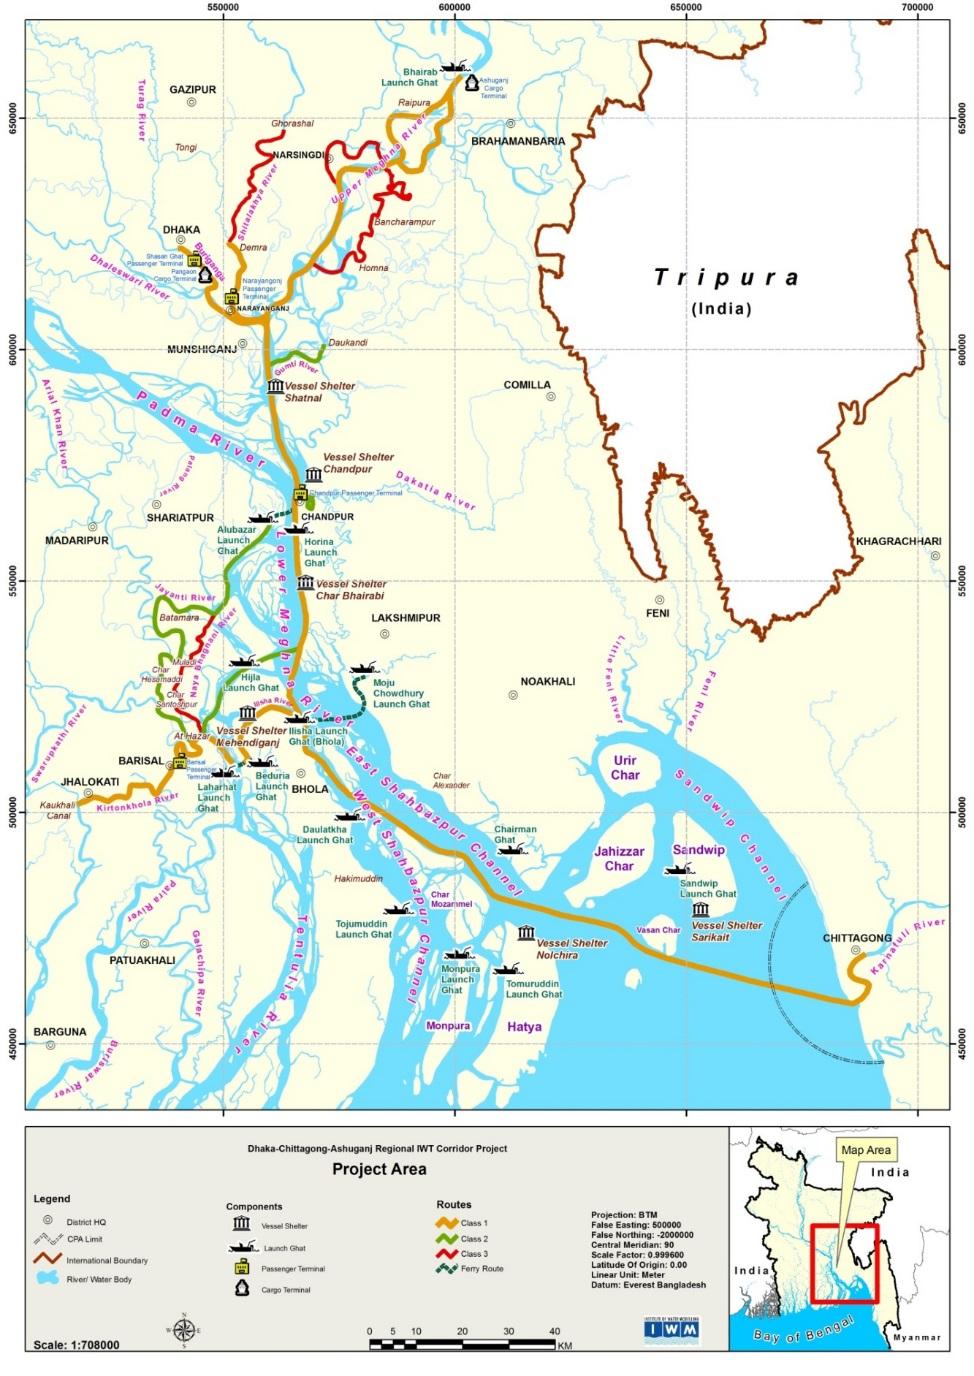 The Proposed Bangladesh Regional Waterway Transport Project Objective of project: to improve transport efficiency, reliability and safety for passengers and cargo on inland waterways along the